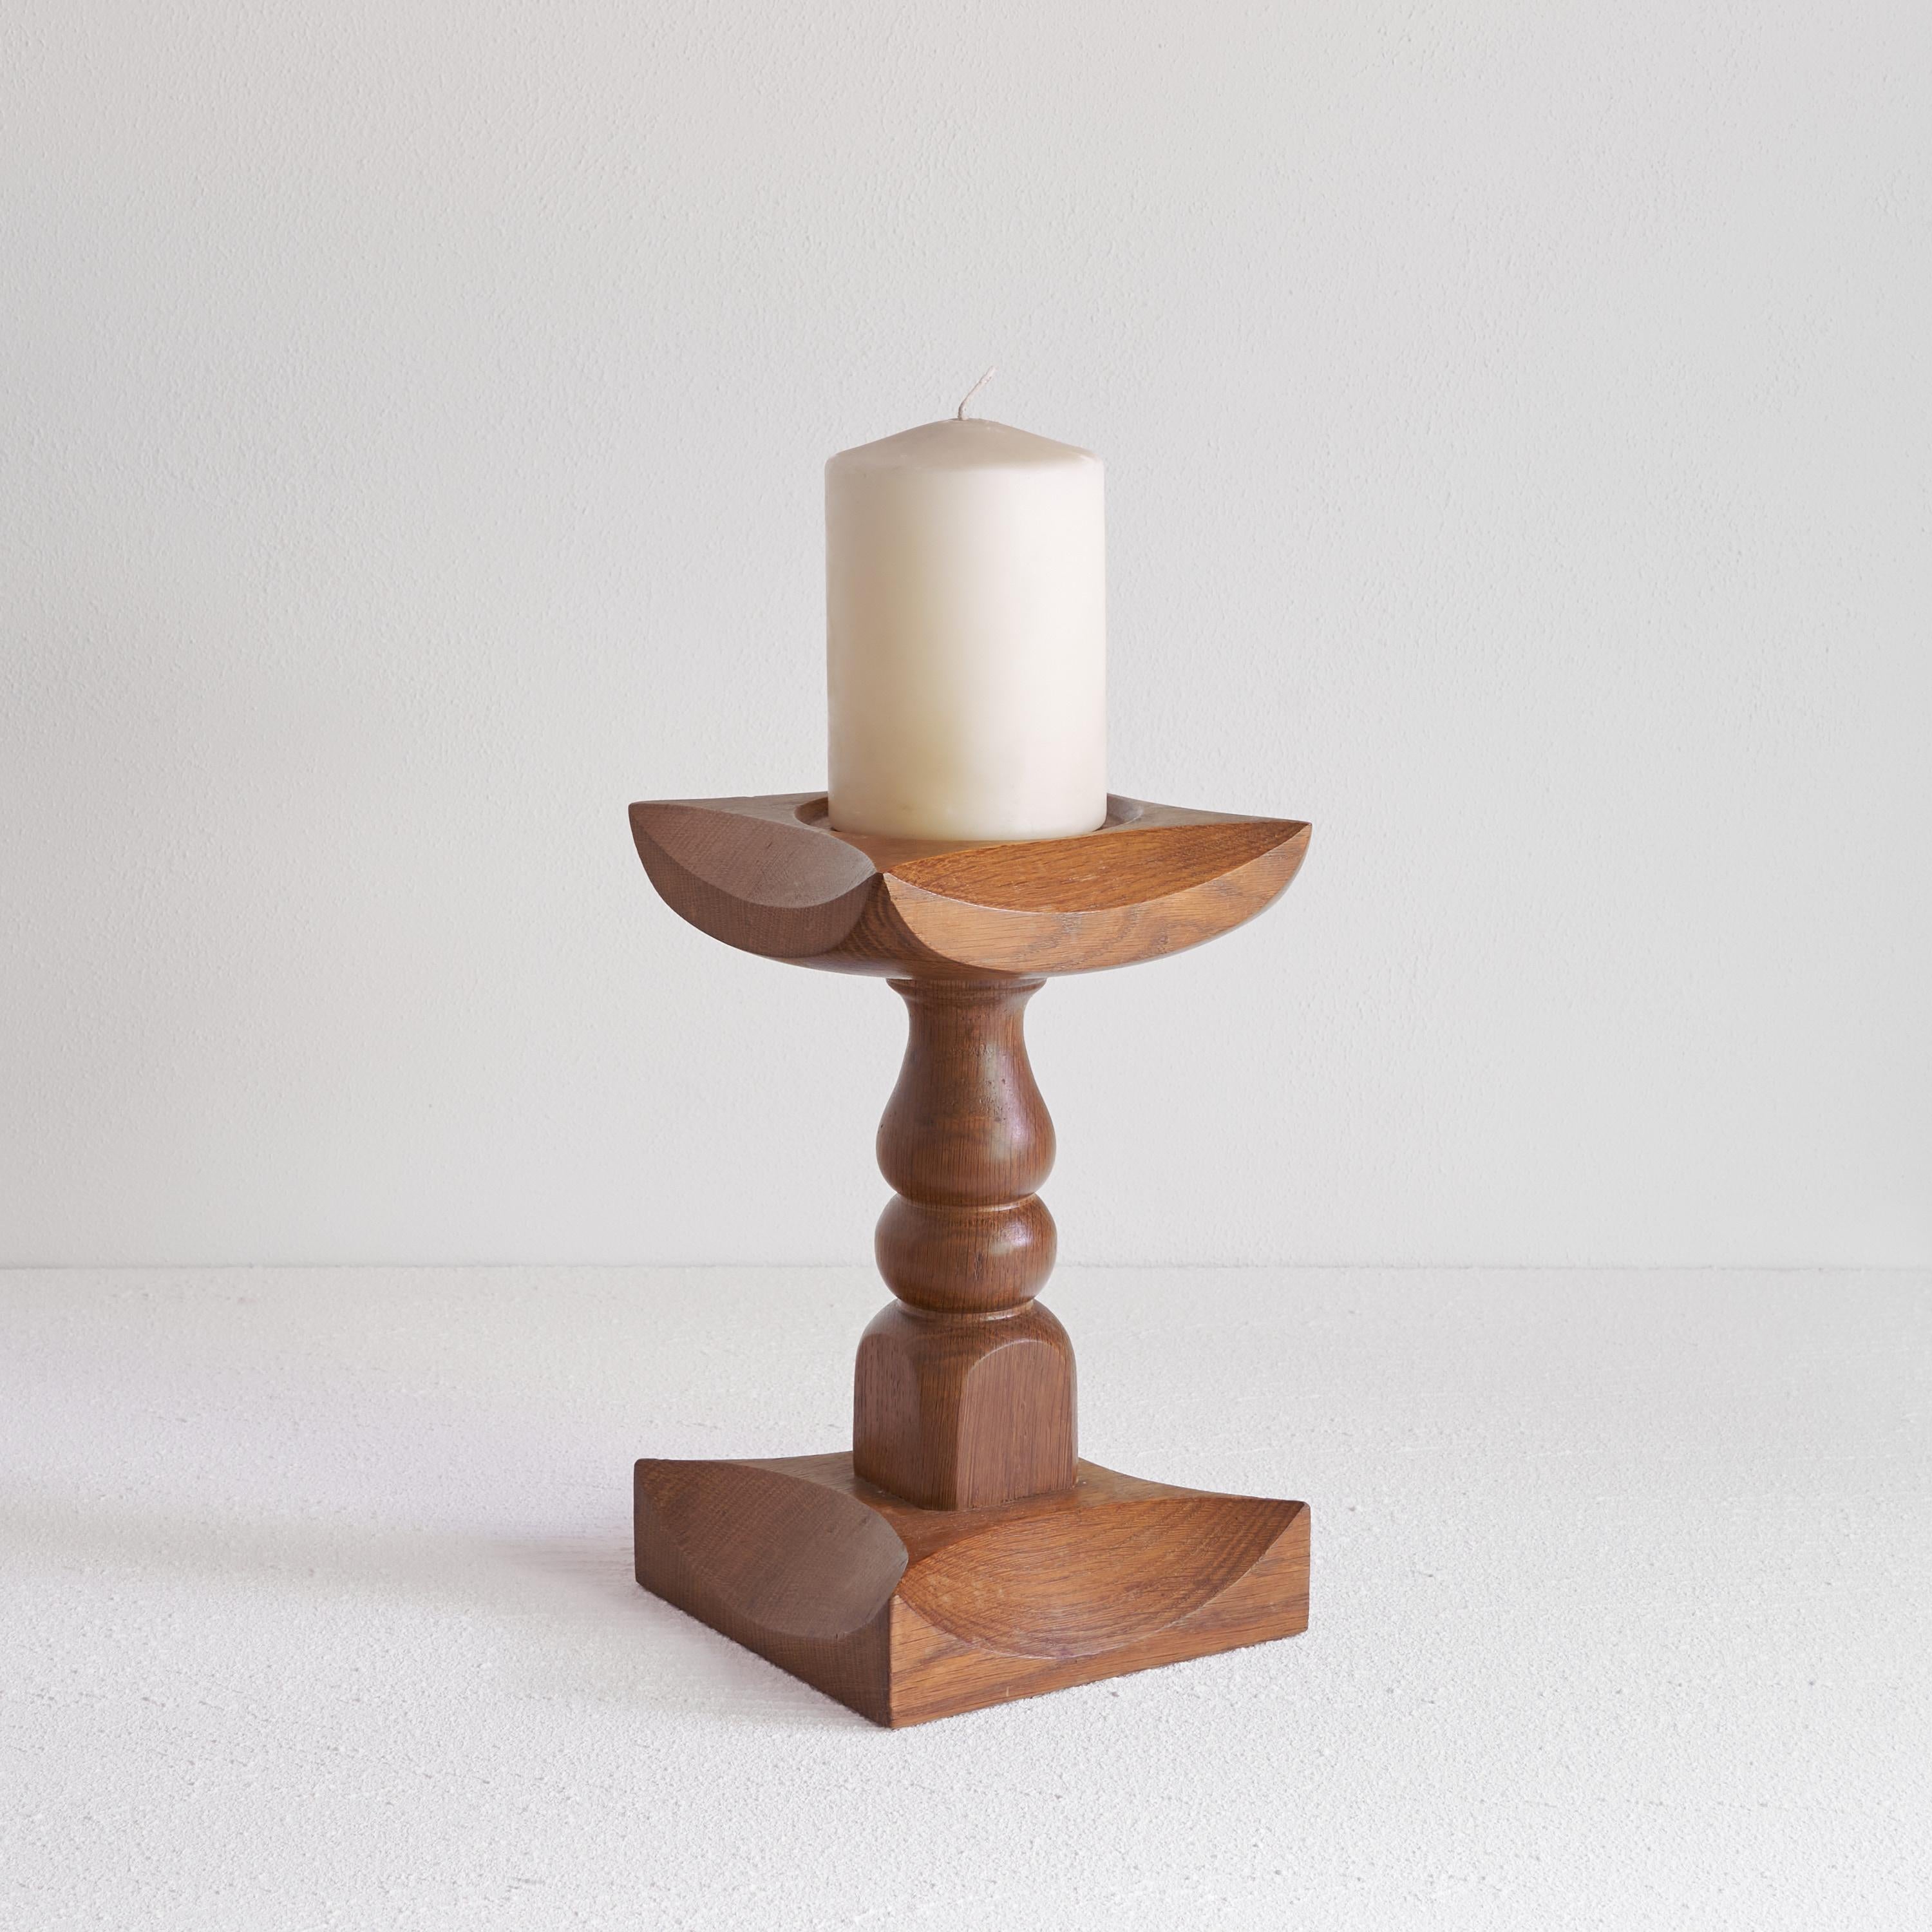 Brutalist candle holder in solid oak, mid-20th century.

Very graphical and sizable candle holder in a distinct brutalist style. Due to the size and shape, this candle holder will be a conversation piece on your sideboard or table. The use of